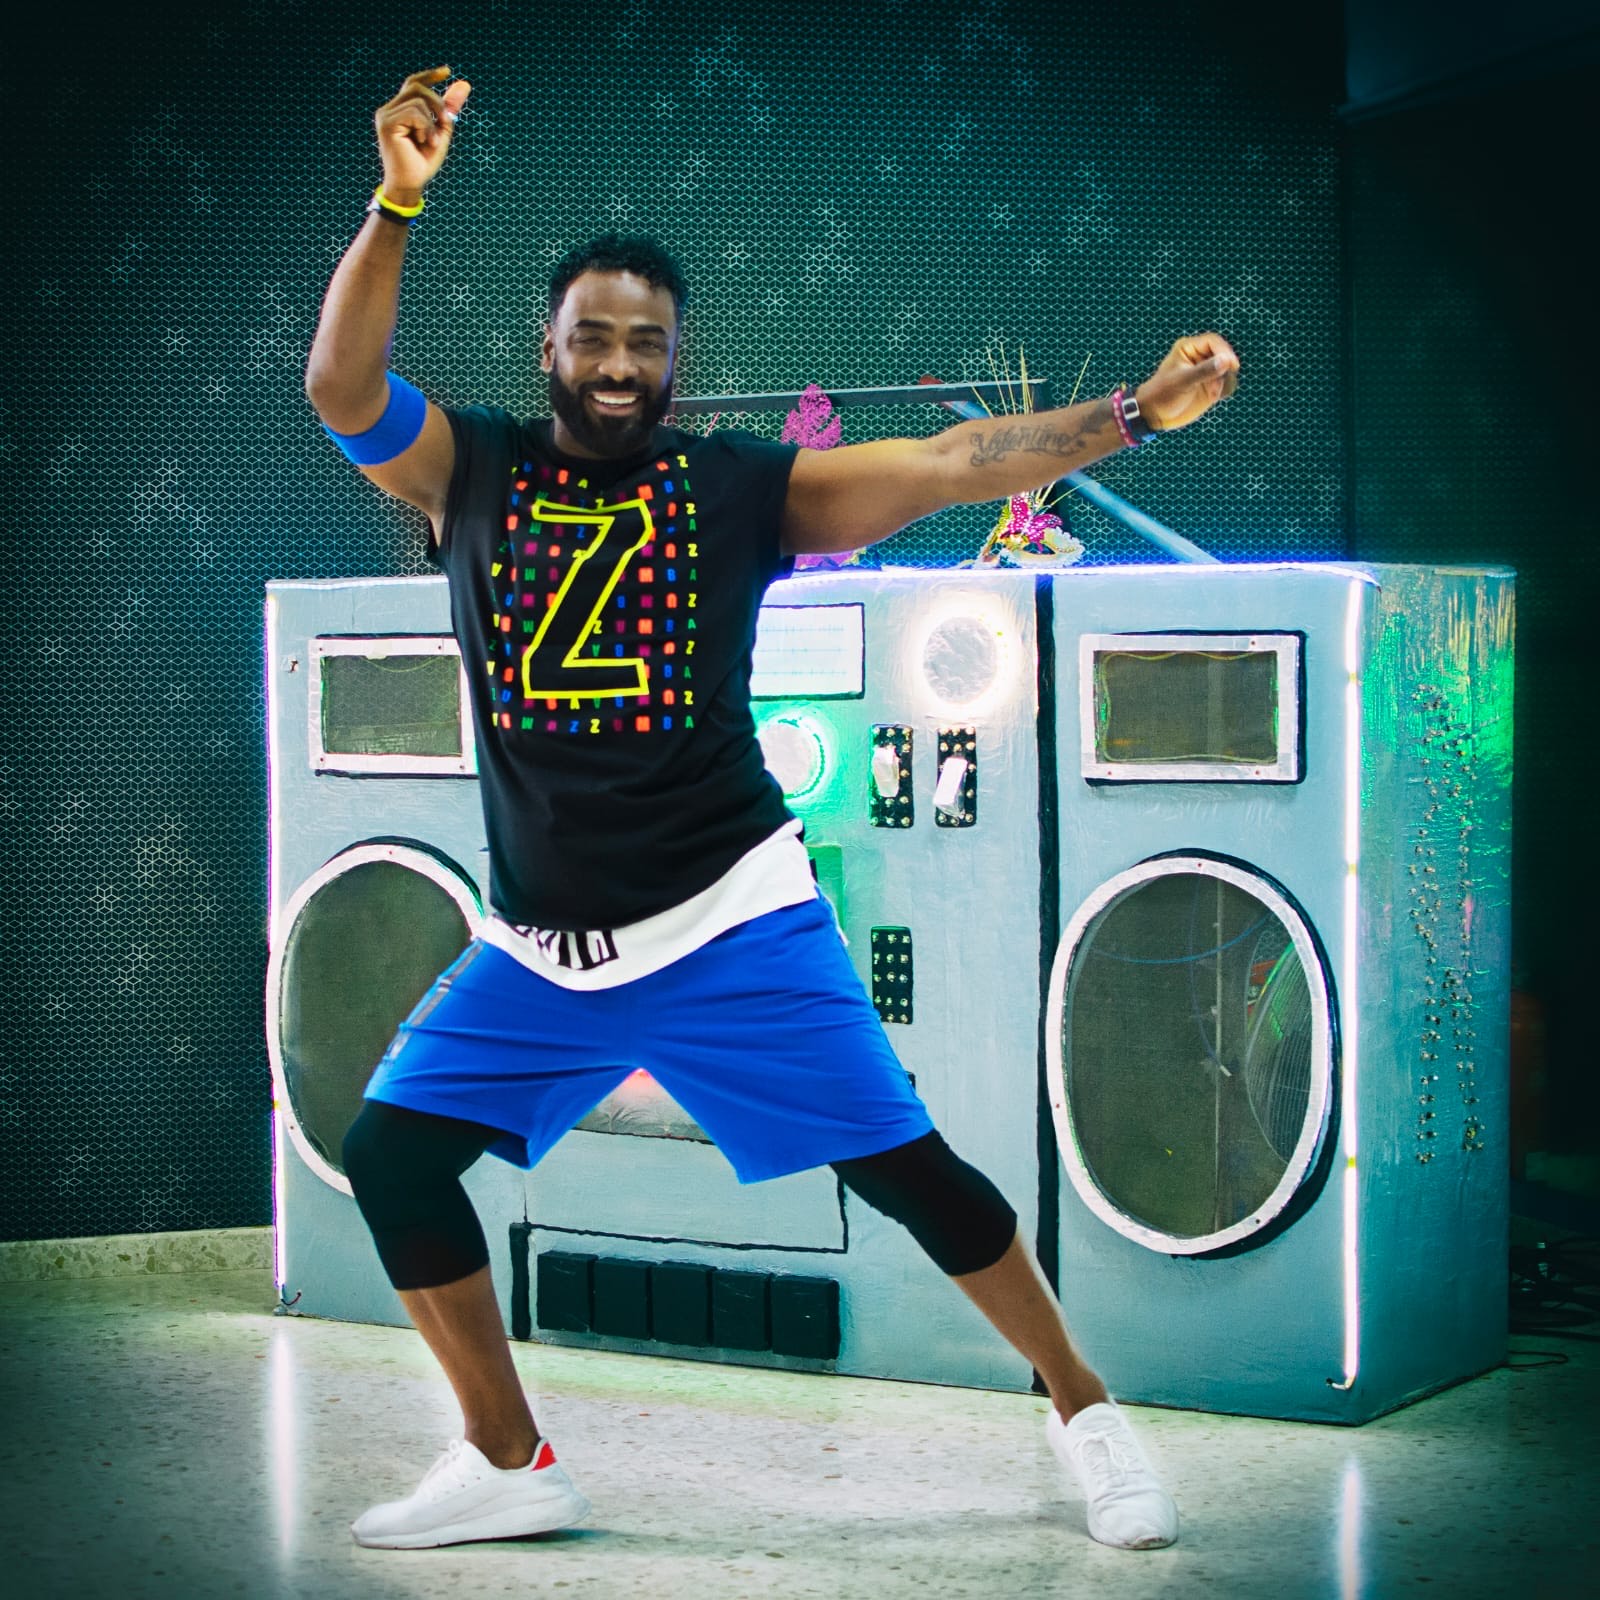 CONNECTICUT: TONY MOSQUERA & FRIENDS ZUMBA® FITNESS EXPERIENCE